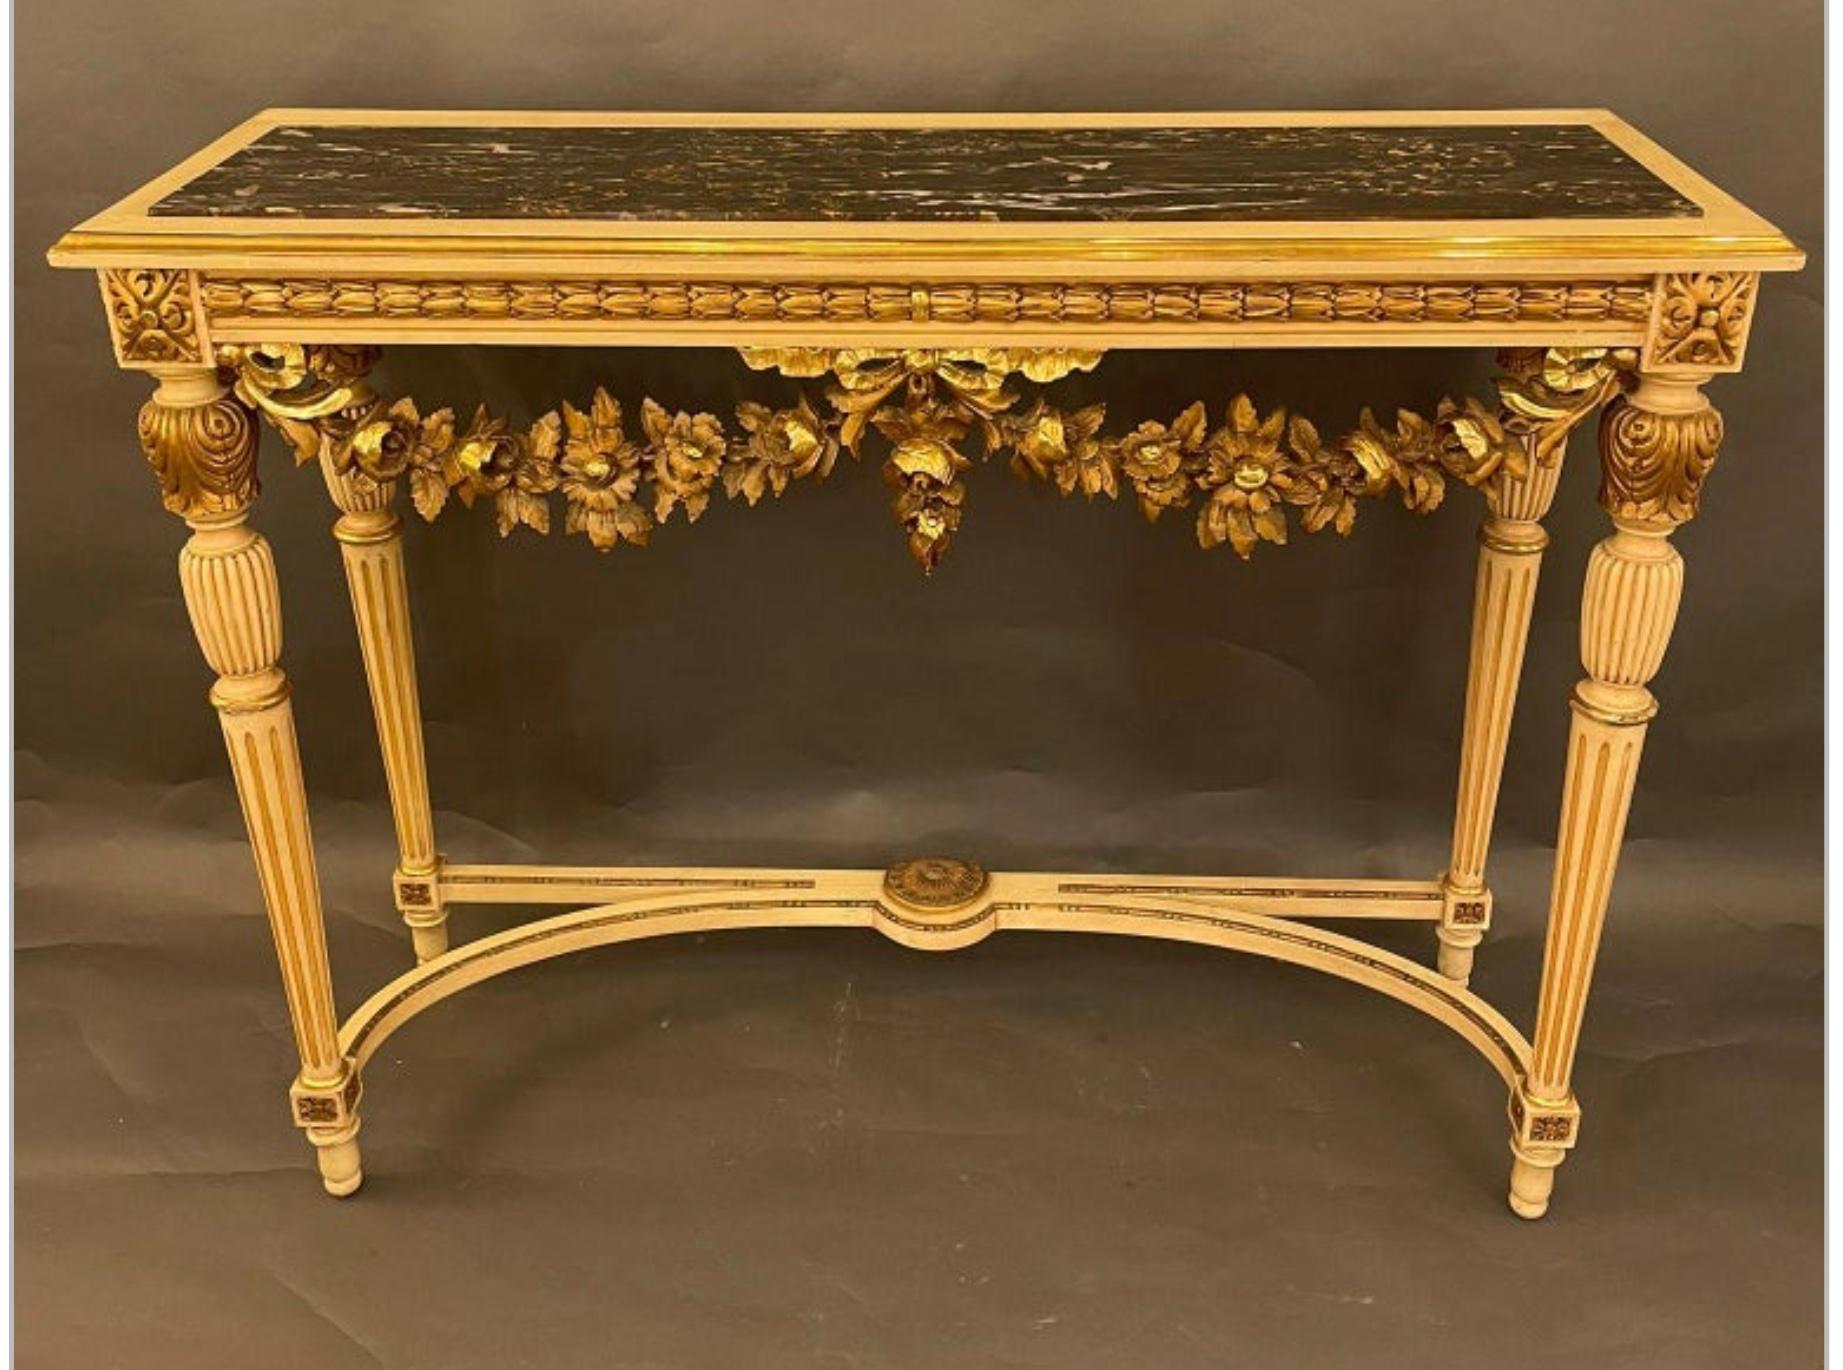 An elegant Jansens French Louis XVI style with a rare 